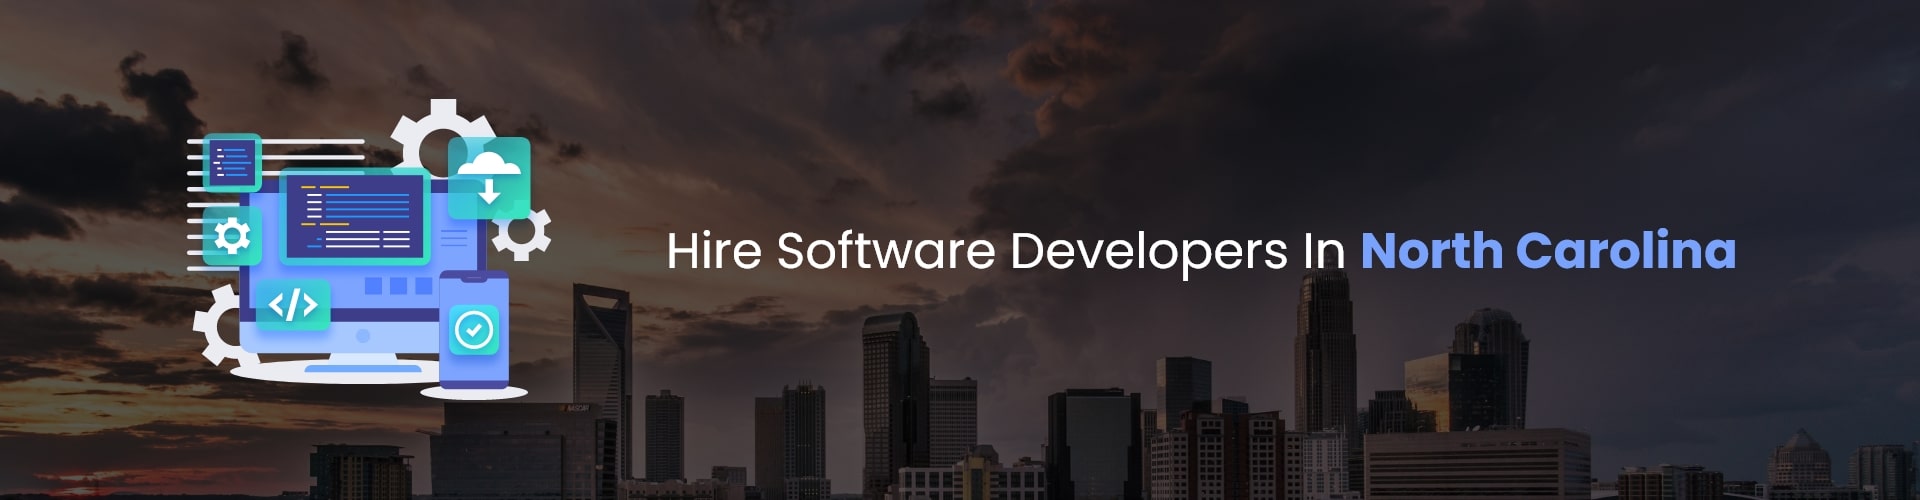 hire software developers in north carolina